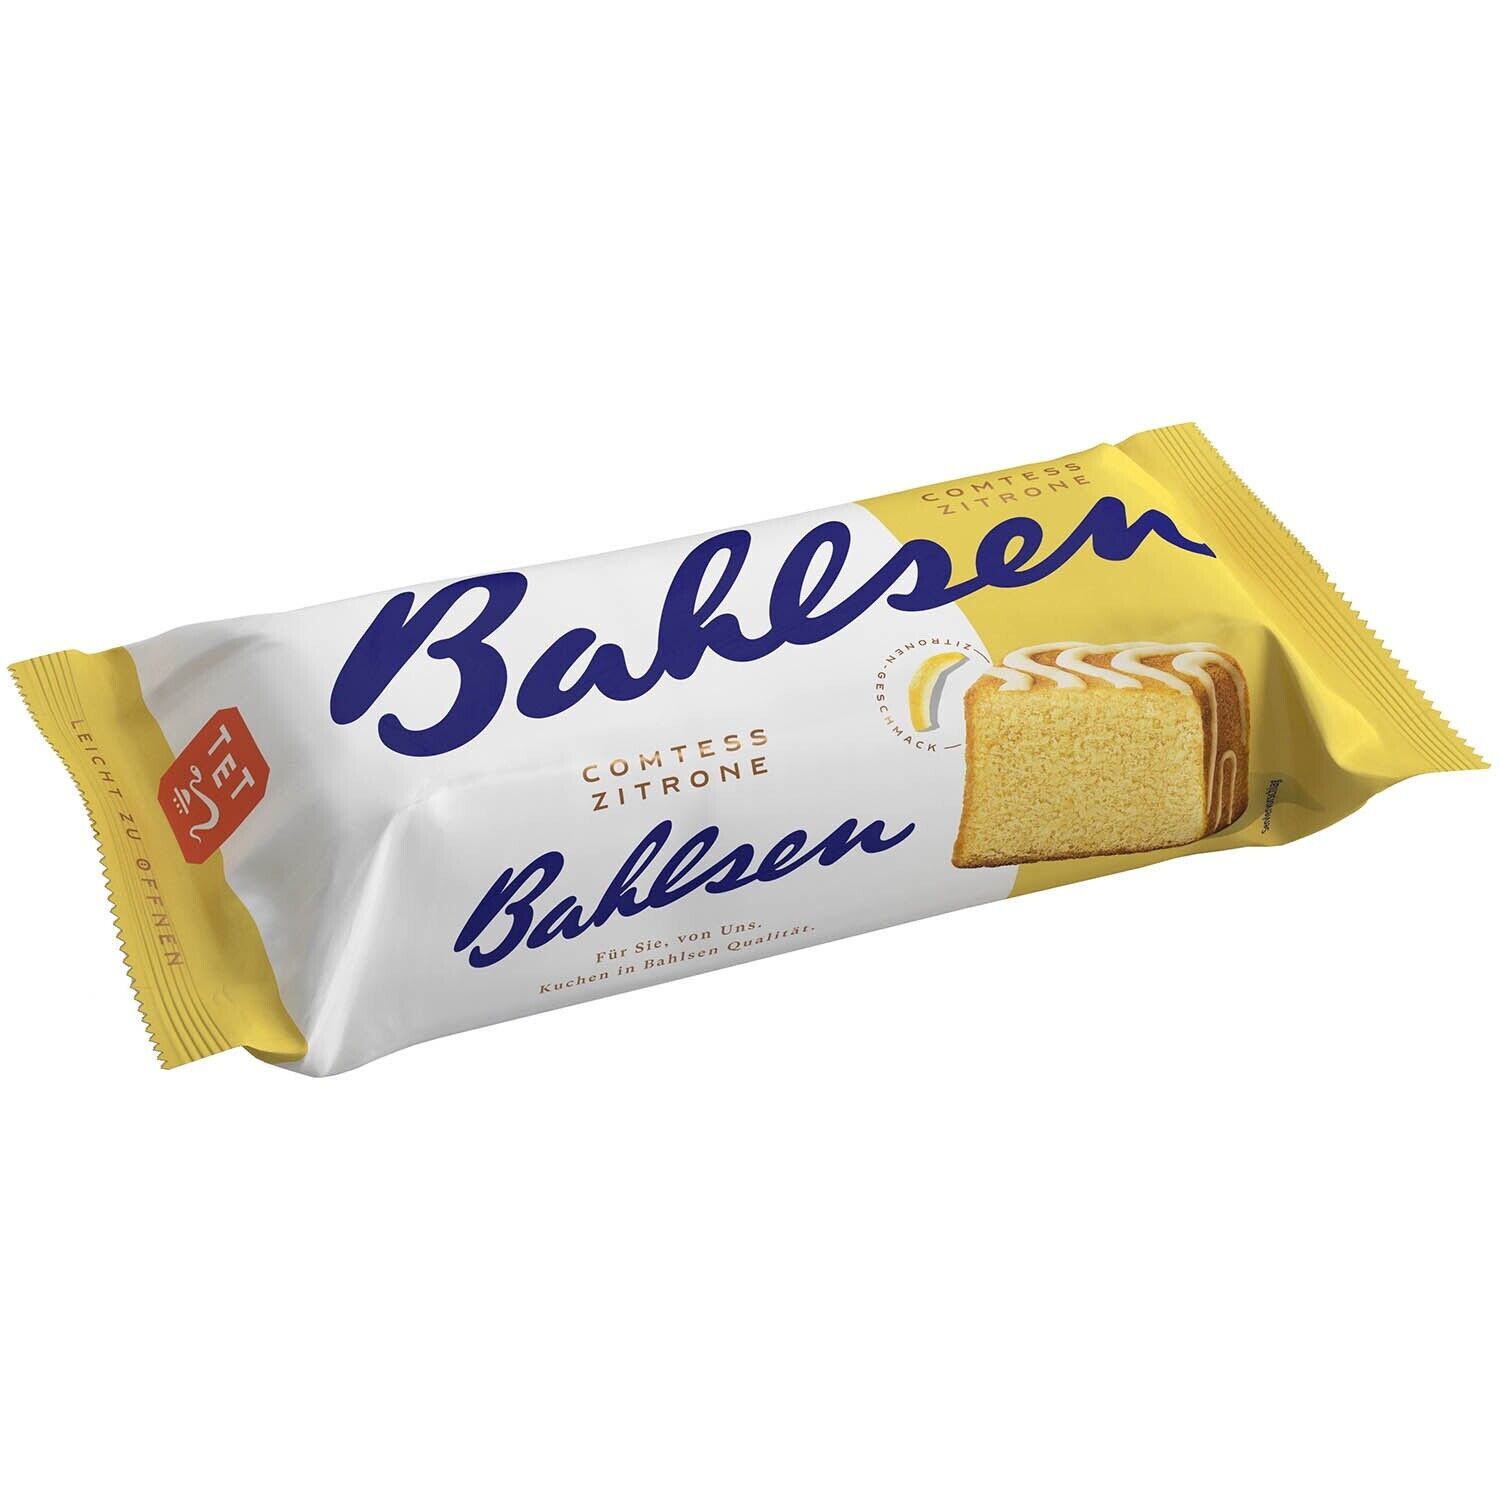 Bahlsen COMTESS Lemon Loaf - READY TO EAT- 350g Made in Germany FREE SHIPPING - $16.82